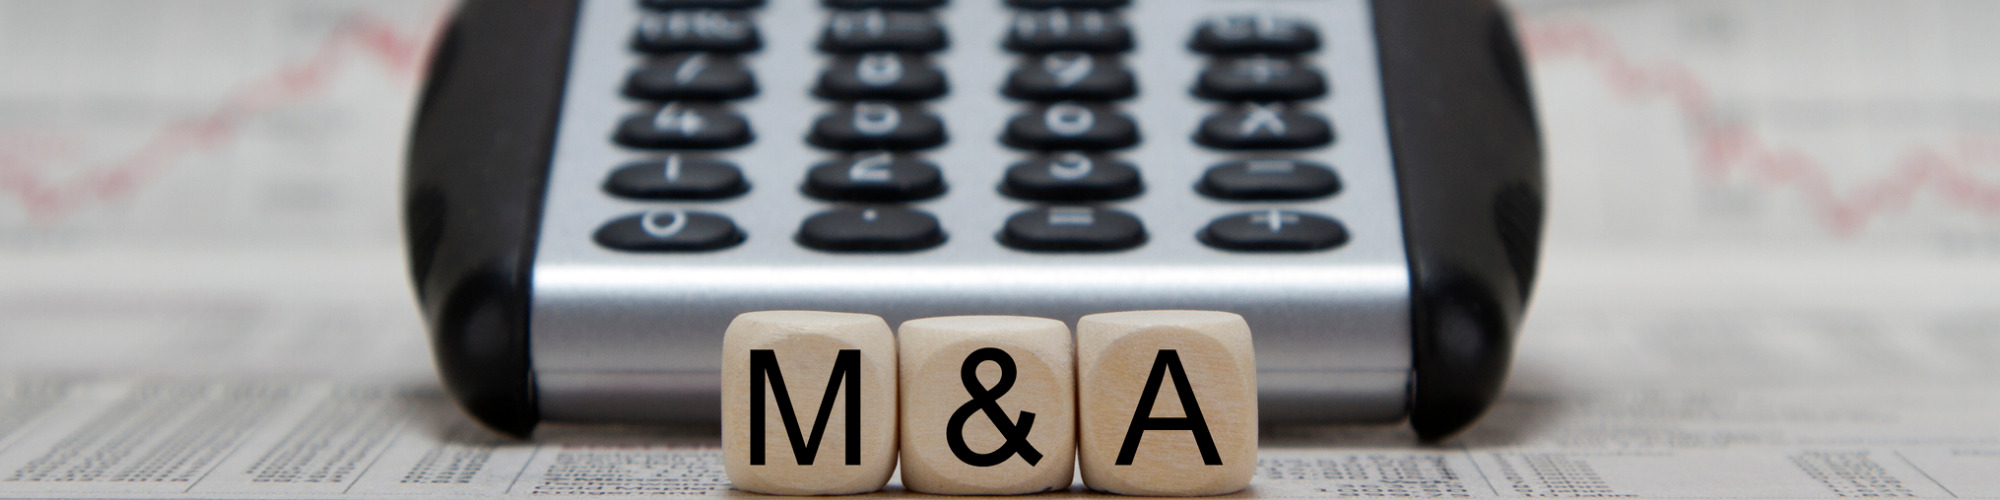 Accounting for Mergers & Acquisitions - A Guide for Corporate Lawyers